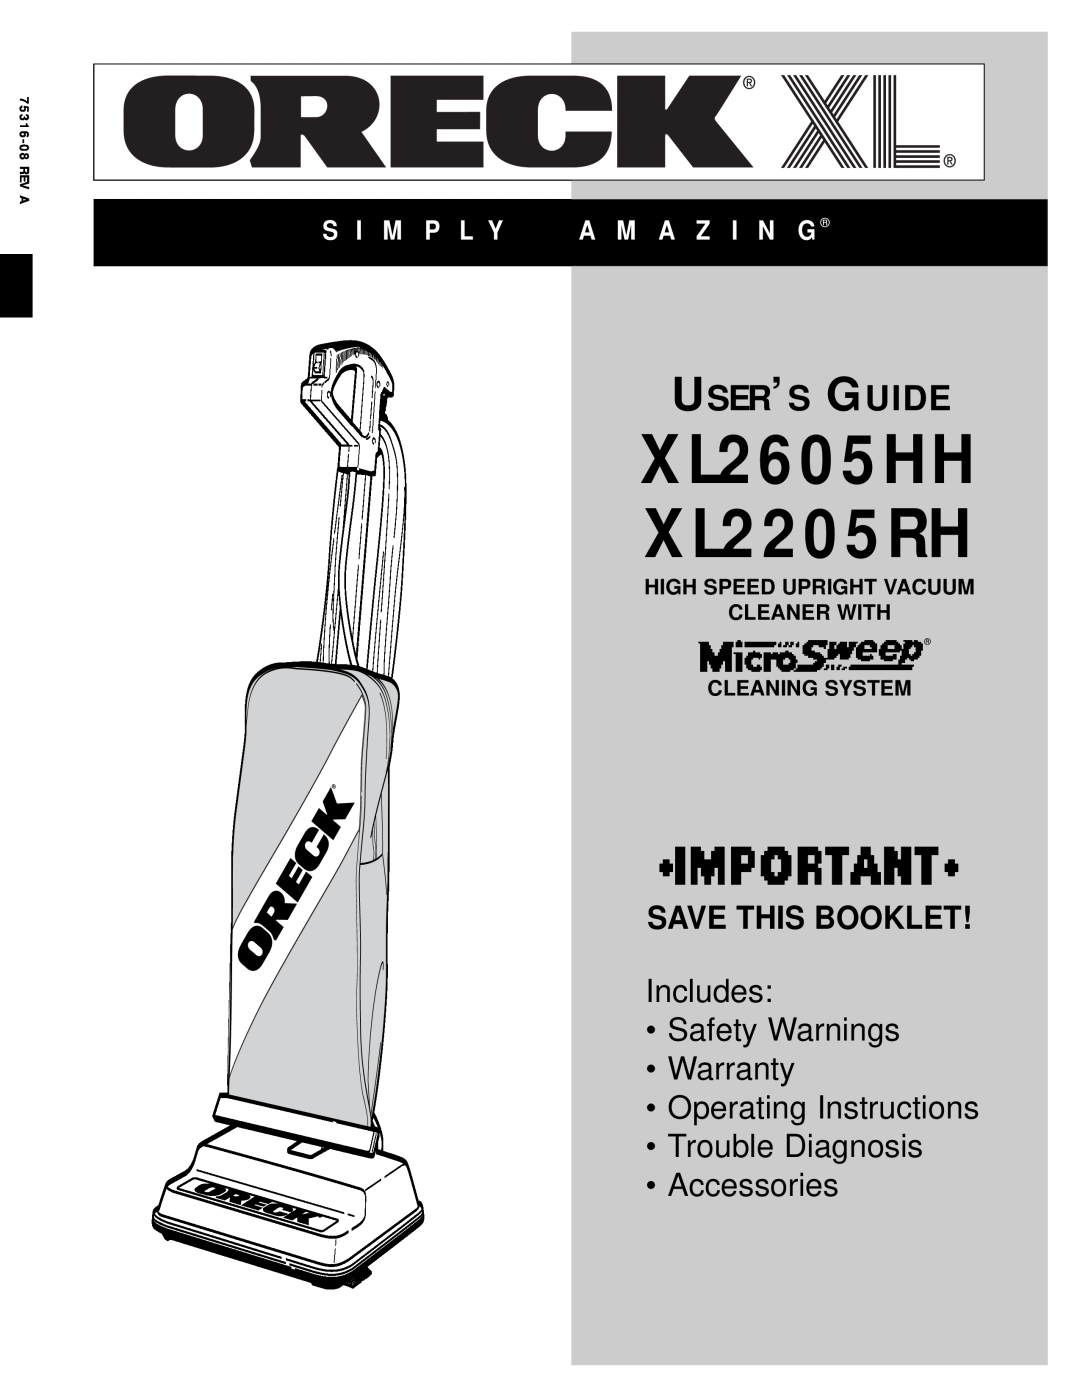 Oreck warranty User’S Guide, High Speed Upright Vacuum Cleaner With, Cleaning System, XL2605HH XL2205RH, Accessories 